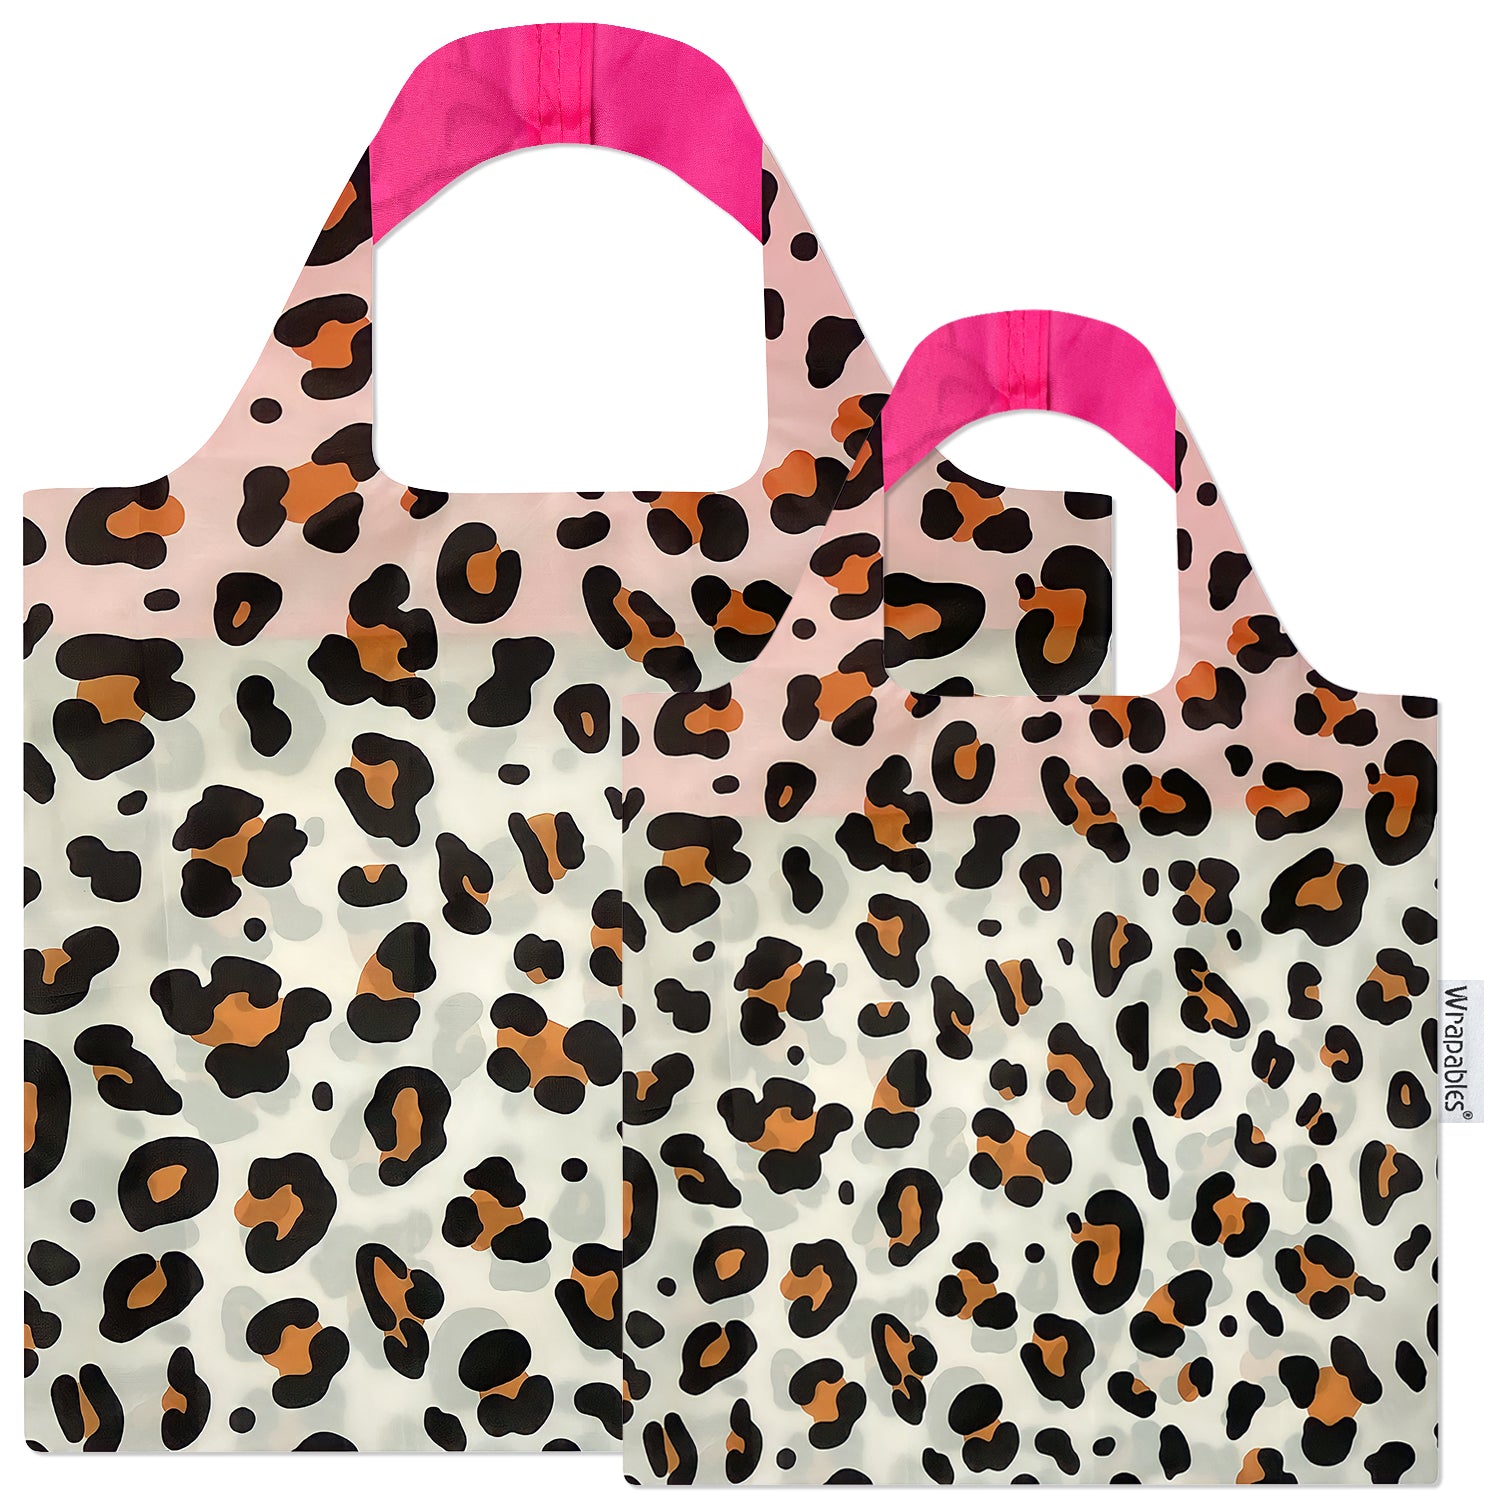 Wrapables Large & Small Foldable Tote Nylon Reusable Grocery Bags, Set of 2, Bright Pink